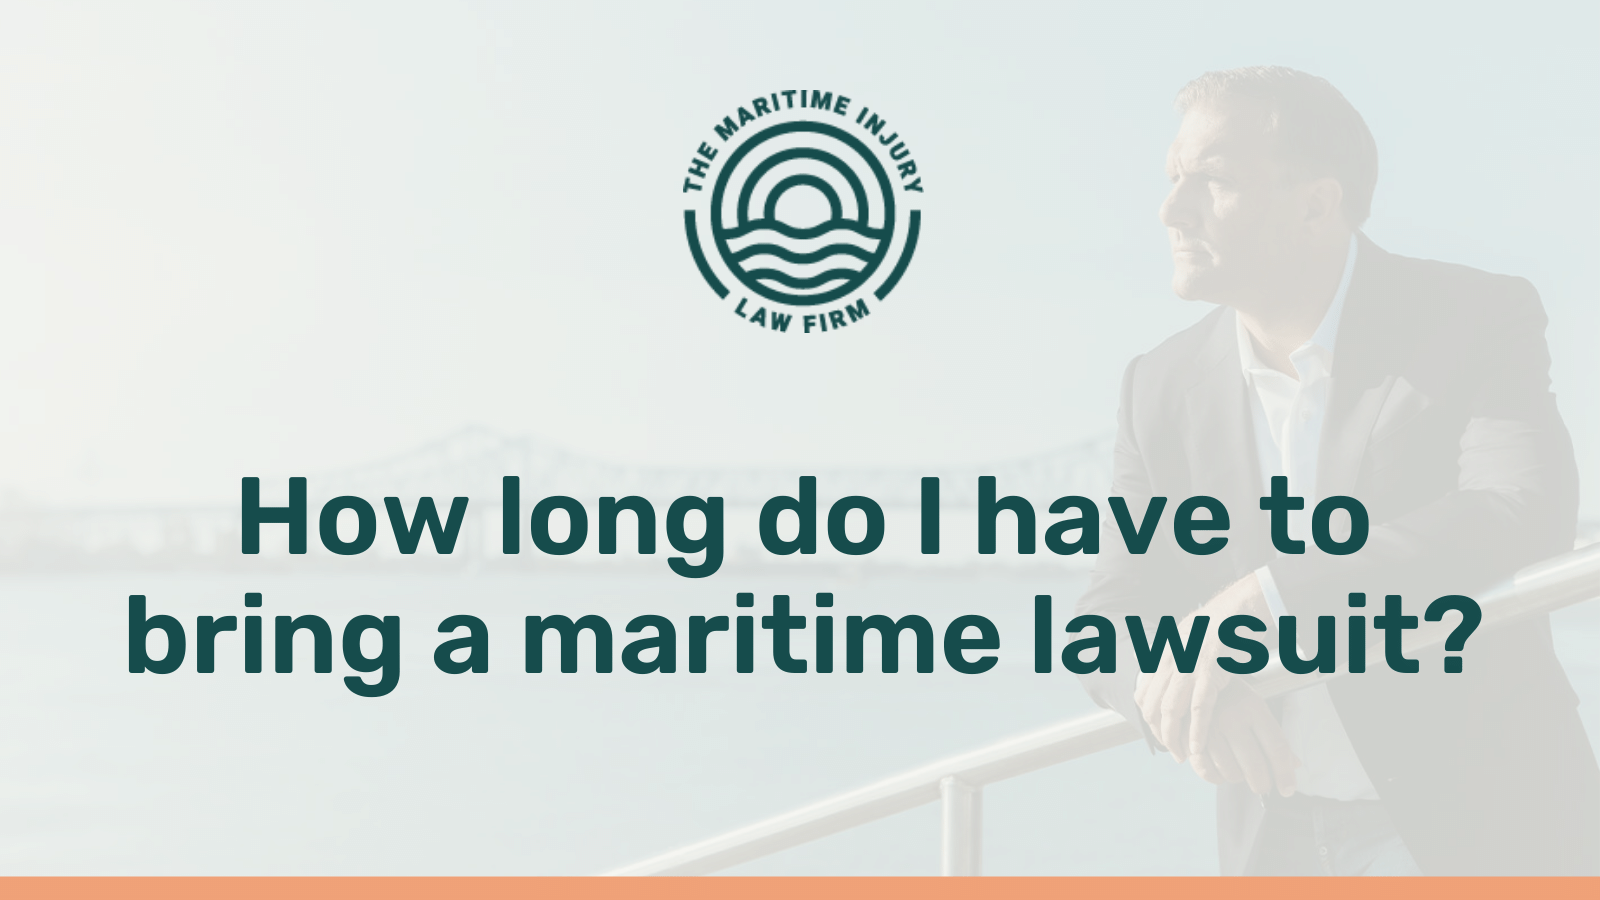 How long do I have to bring a maritime lawsuit - maritime injury law firm - George Vourvoulias